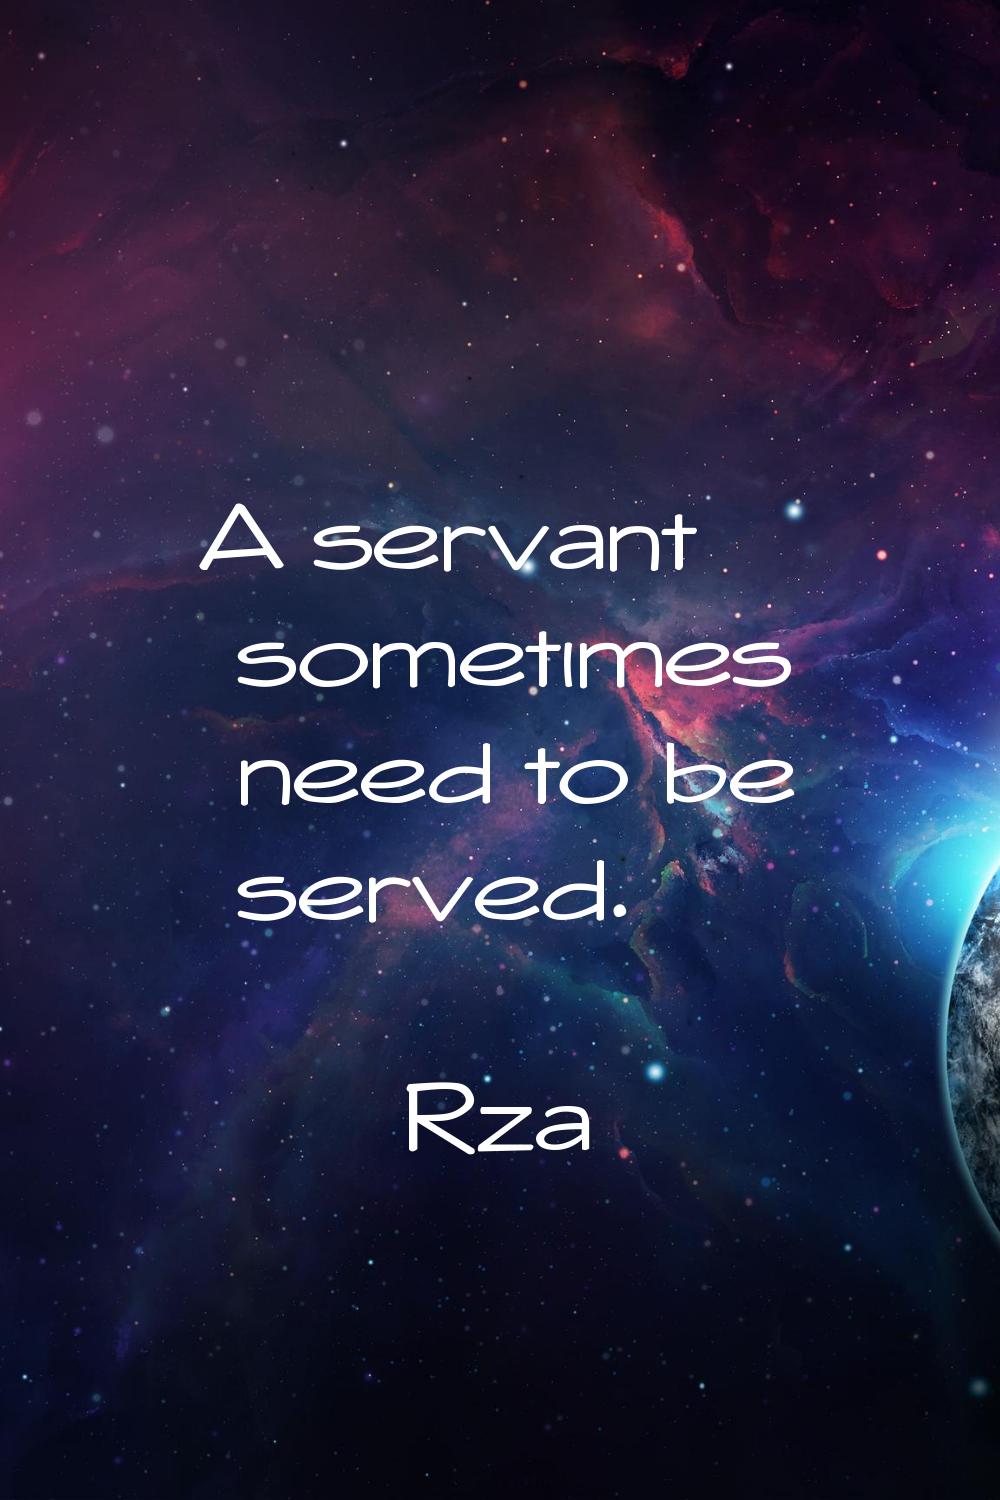 A servant sometimes need to be served.